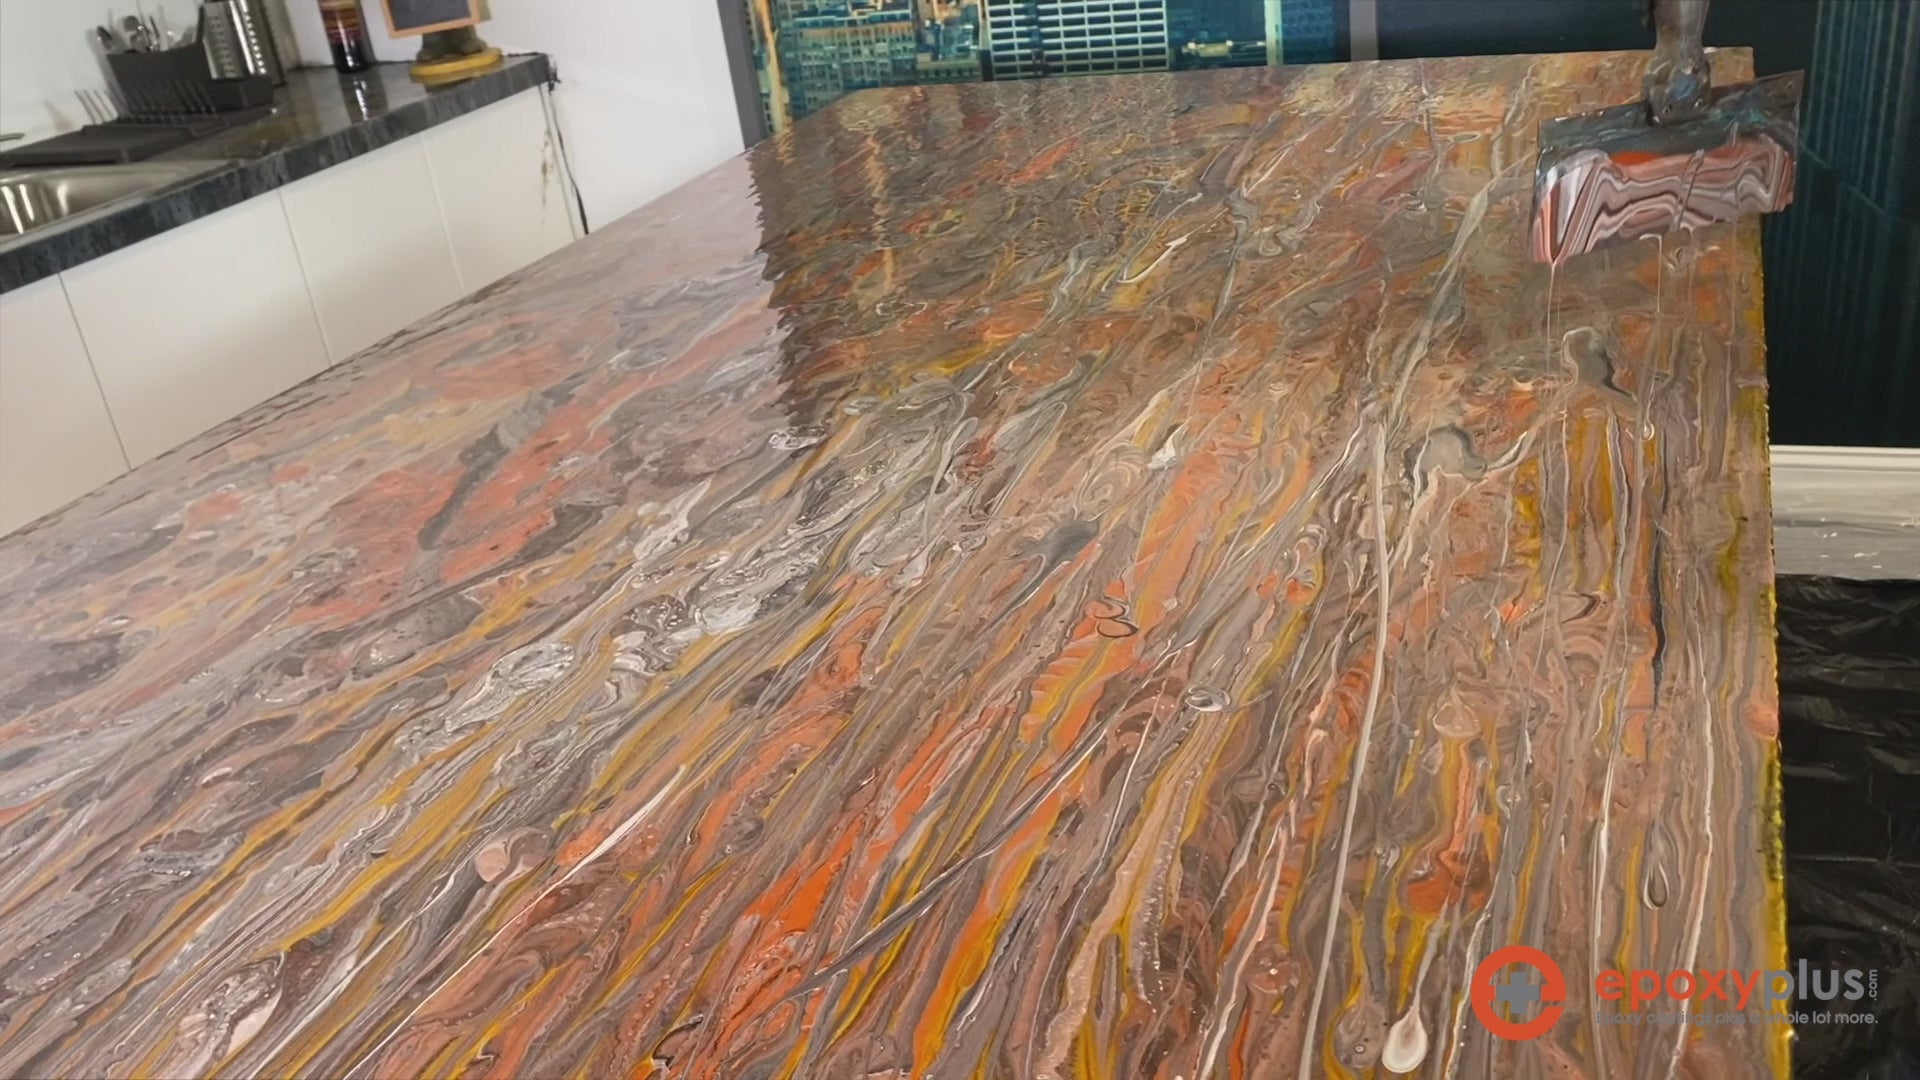 ARADON Resin Coating - Craft Customized Countertops with Professional Results